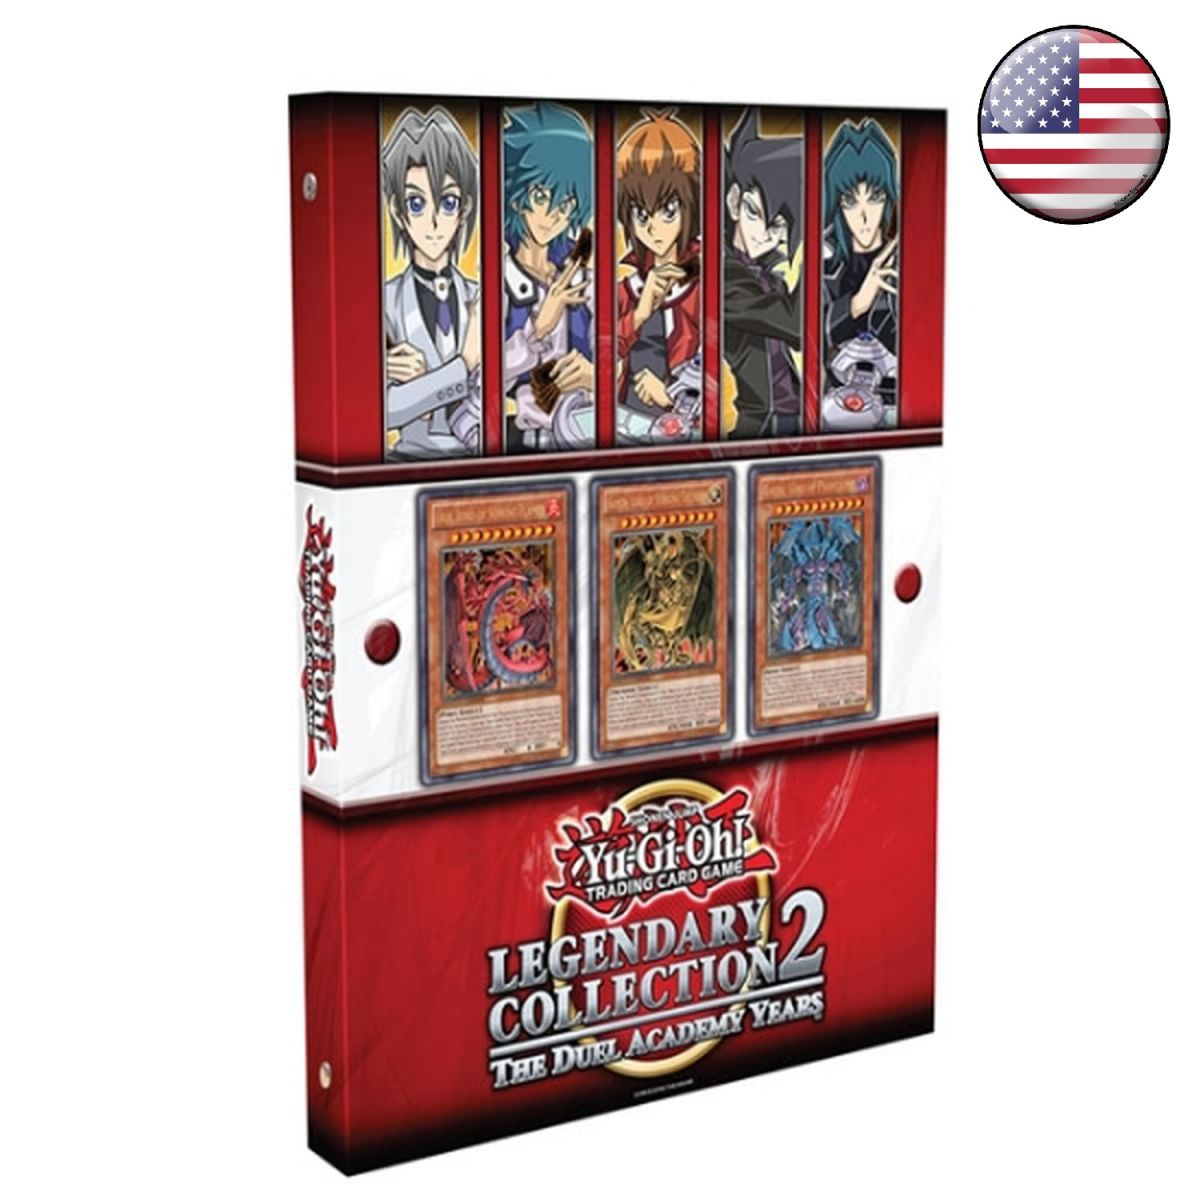 Item Yu-Gi-Oh! - Legendary Collection 2 : The Duel Academy Years - Unlimited - Americain US